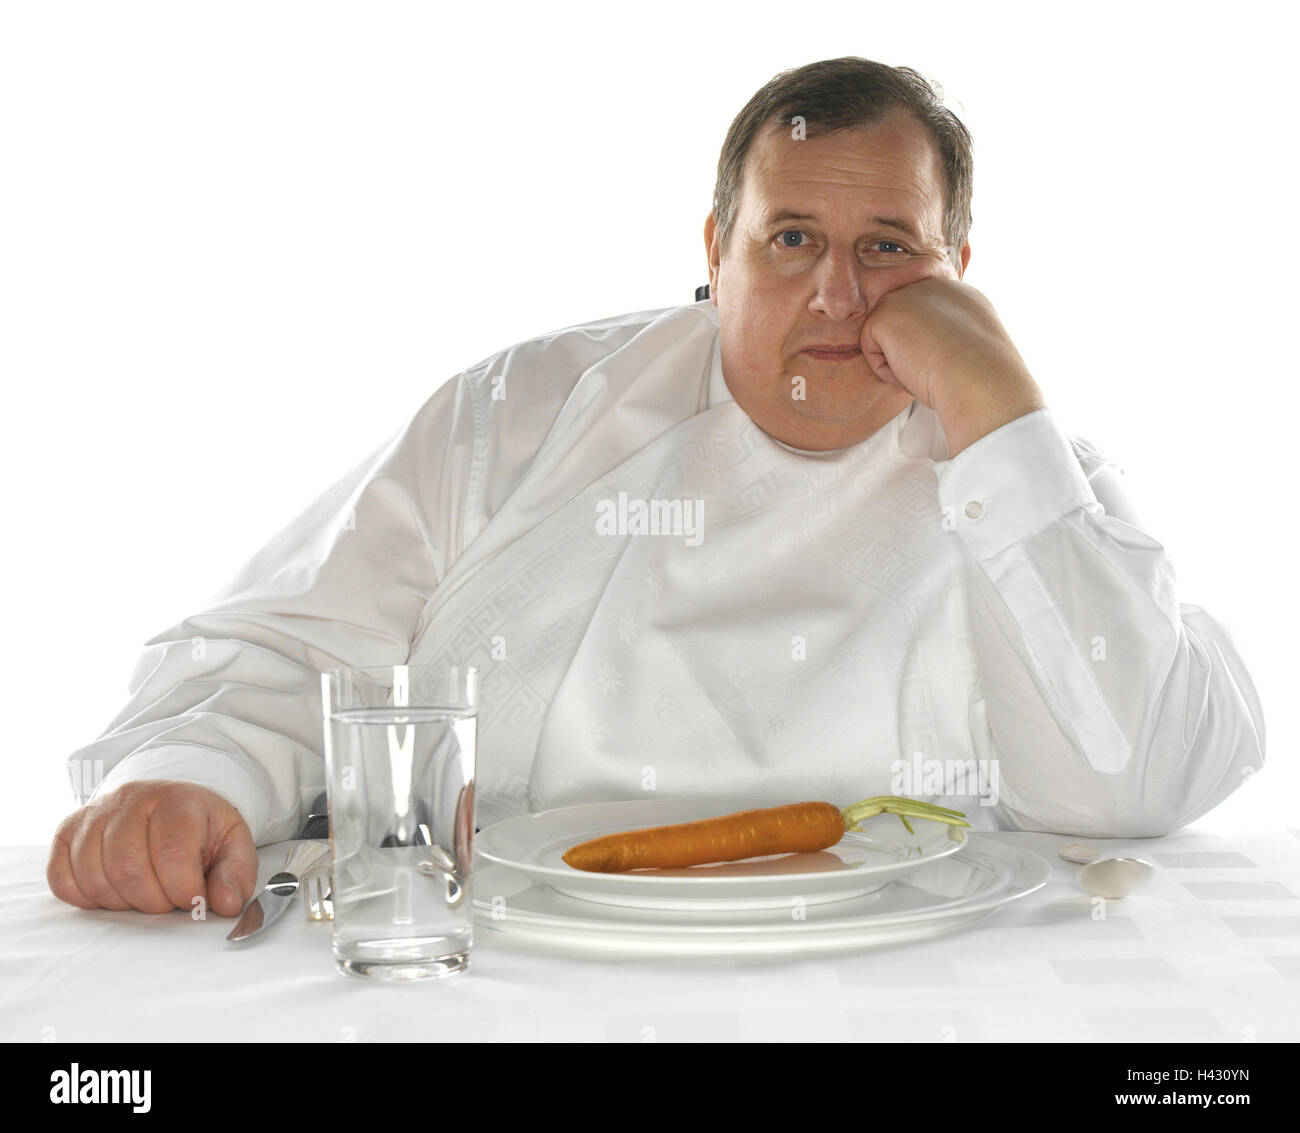 Diet, man, overweight, plate, carrot, thoughtful middle old person, thickly, bold, overweight, unhealthily, injuriously, adiposity, obesity, fatly, obesity, health risk, head rest on, table, dining table, covered, glass, water, water glass, cover, carrot, Stock Photo